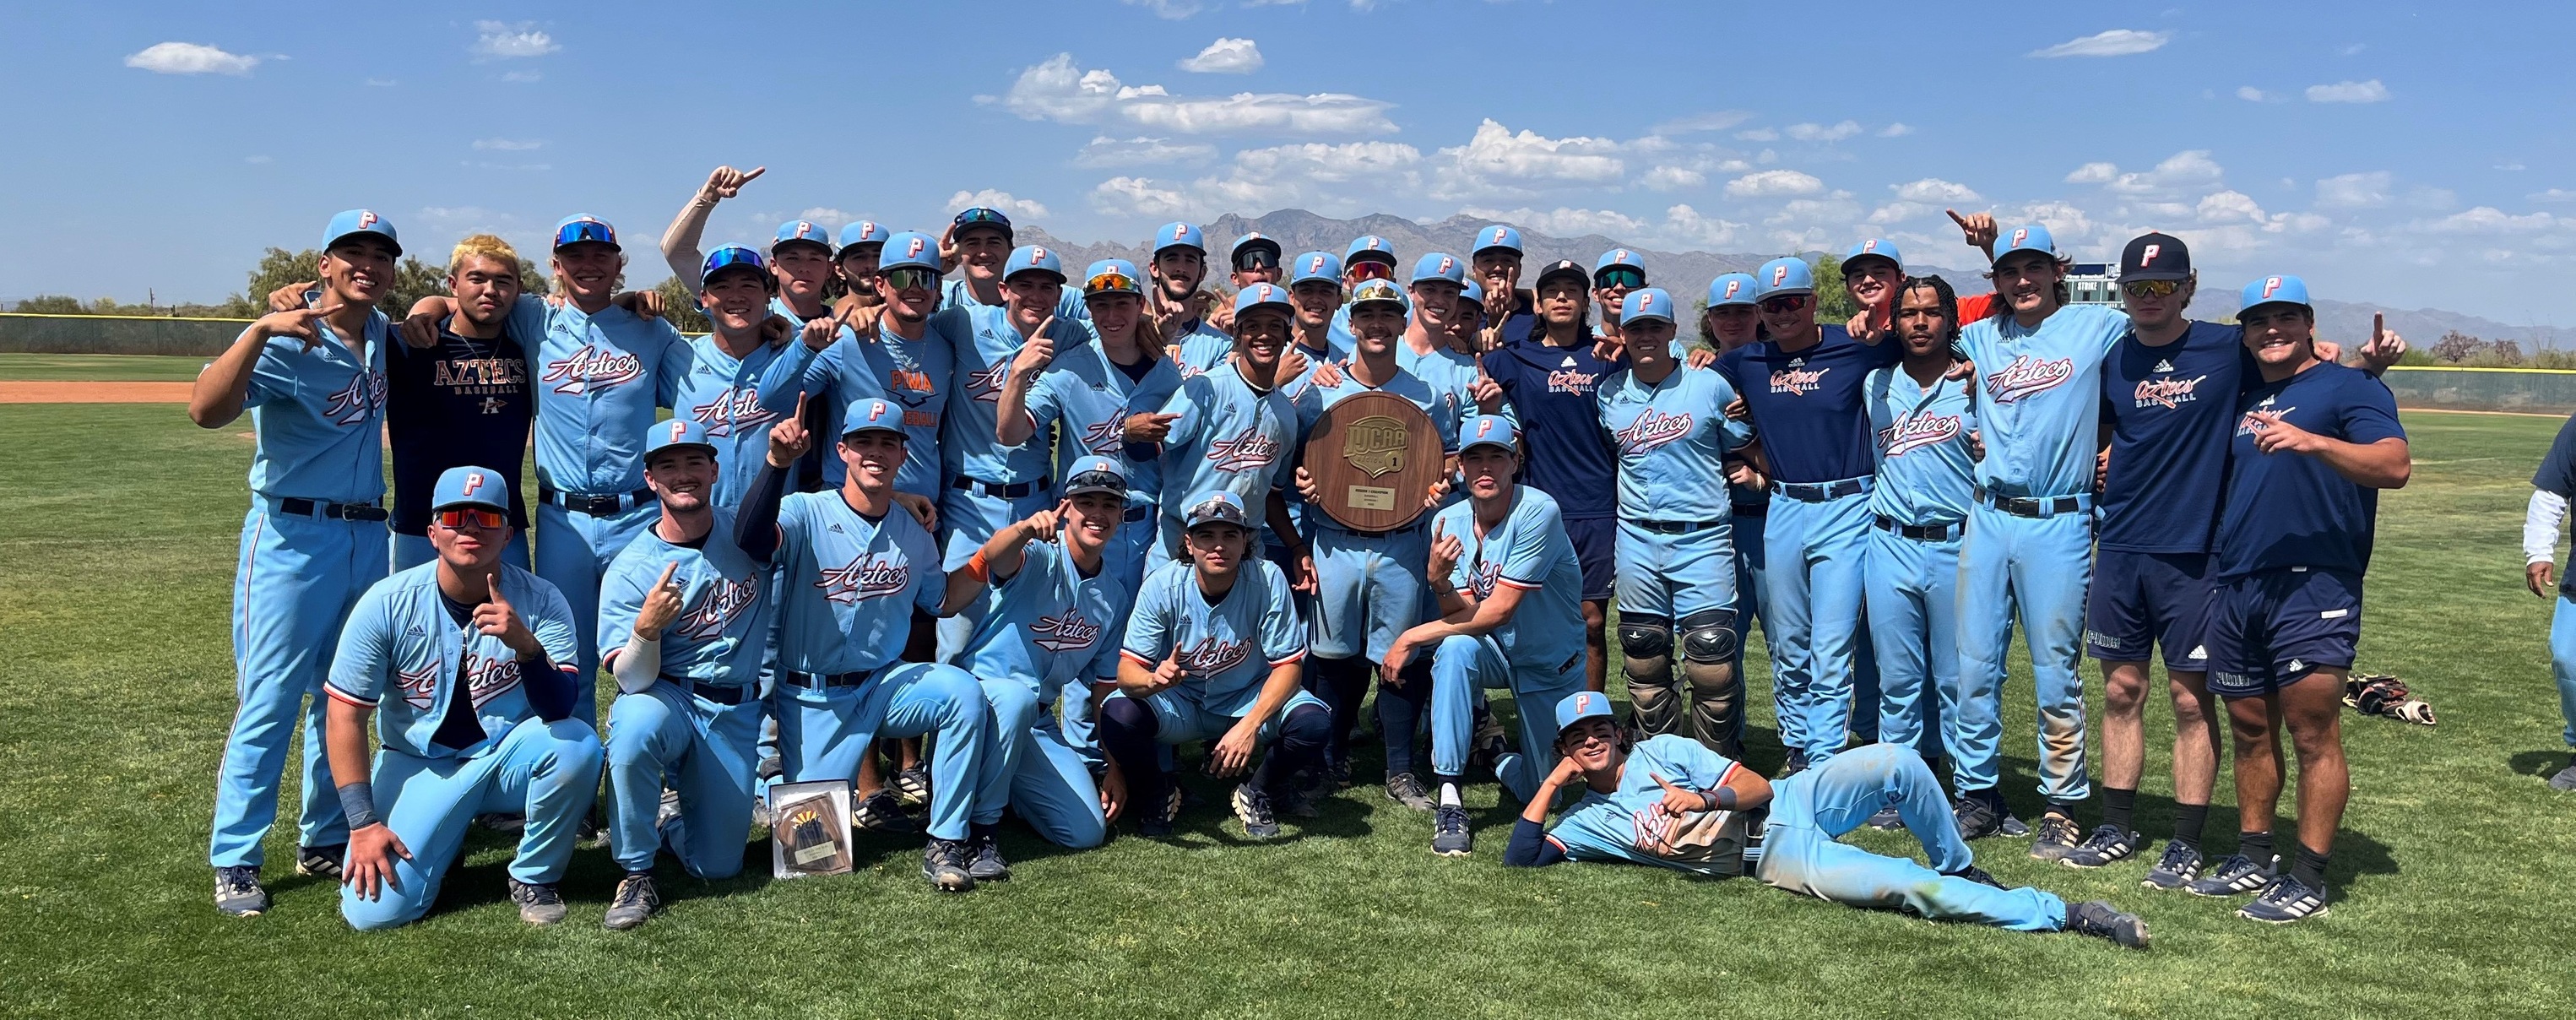 The Aztecs baseball team will open the NJCAA West District Tournament on Thursday against McCook Community College (NE) at 3:00 p.m. (1:00 p.m. Tucson time). The double elimination tournament will be from Thursday to Saturday at Christenson Field in Beatrice, NE. Photo by Raymond Suarez